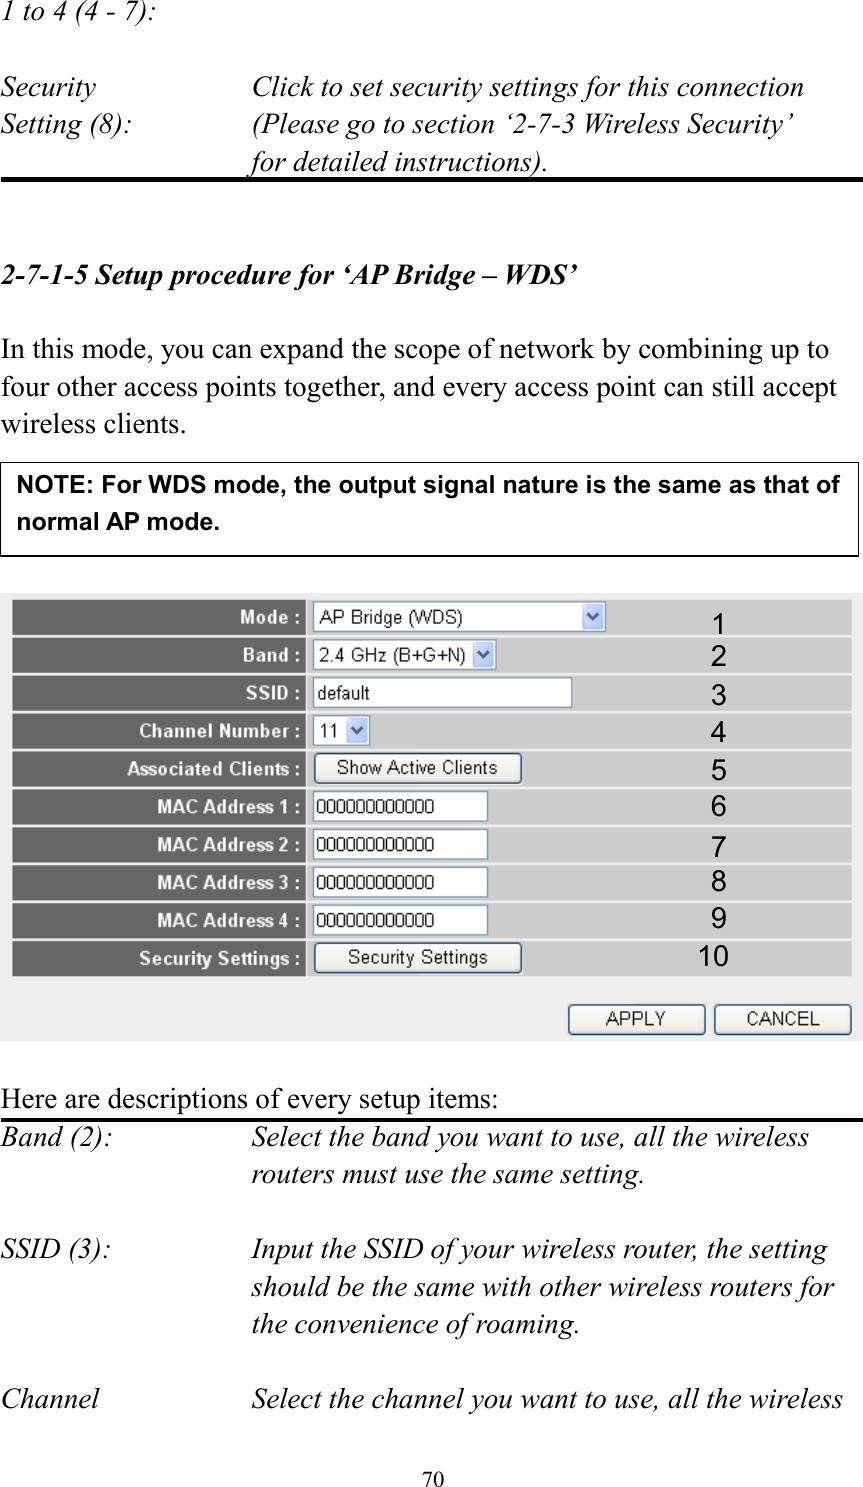 70 1 to 4 (4 - 7):    Security    Click to set security settings for this connection Setting (8):  (Please go to section ‘2-7-3 Wireless Security’   for detailed instructions).   2-7-1-5 Setup procedure for ‘AP Bridge – WDS’  In this mode, you can expand the scope of network by combining up to four other access points together, and every access point can still accept wireless clients.       Here are descriptions of every setup items: Band (2):  Select the band you want to use, all the wireless routers must use the same setting.  SSID (3):  Input the SSID of your wireless router, the setting should be the same with other wireless routers for the convenience of roaming.  Channel  Select the channel you want to use, all the wireless 1 2 3 4 5 7 8 6 9 10 NOTE: For WDS mode, the output signal nature is the same as that of normal AP mode.   